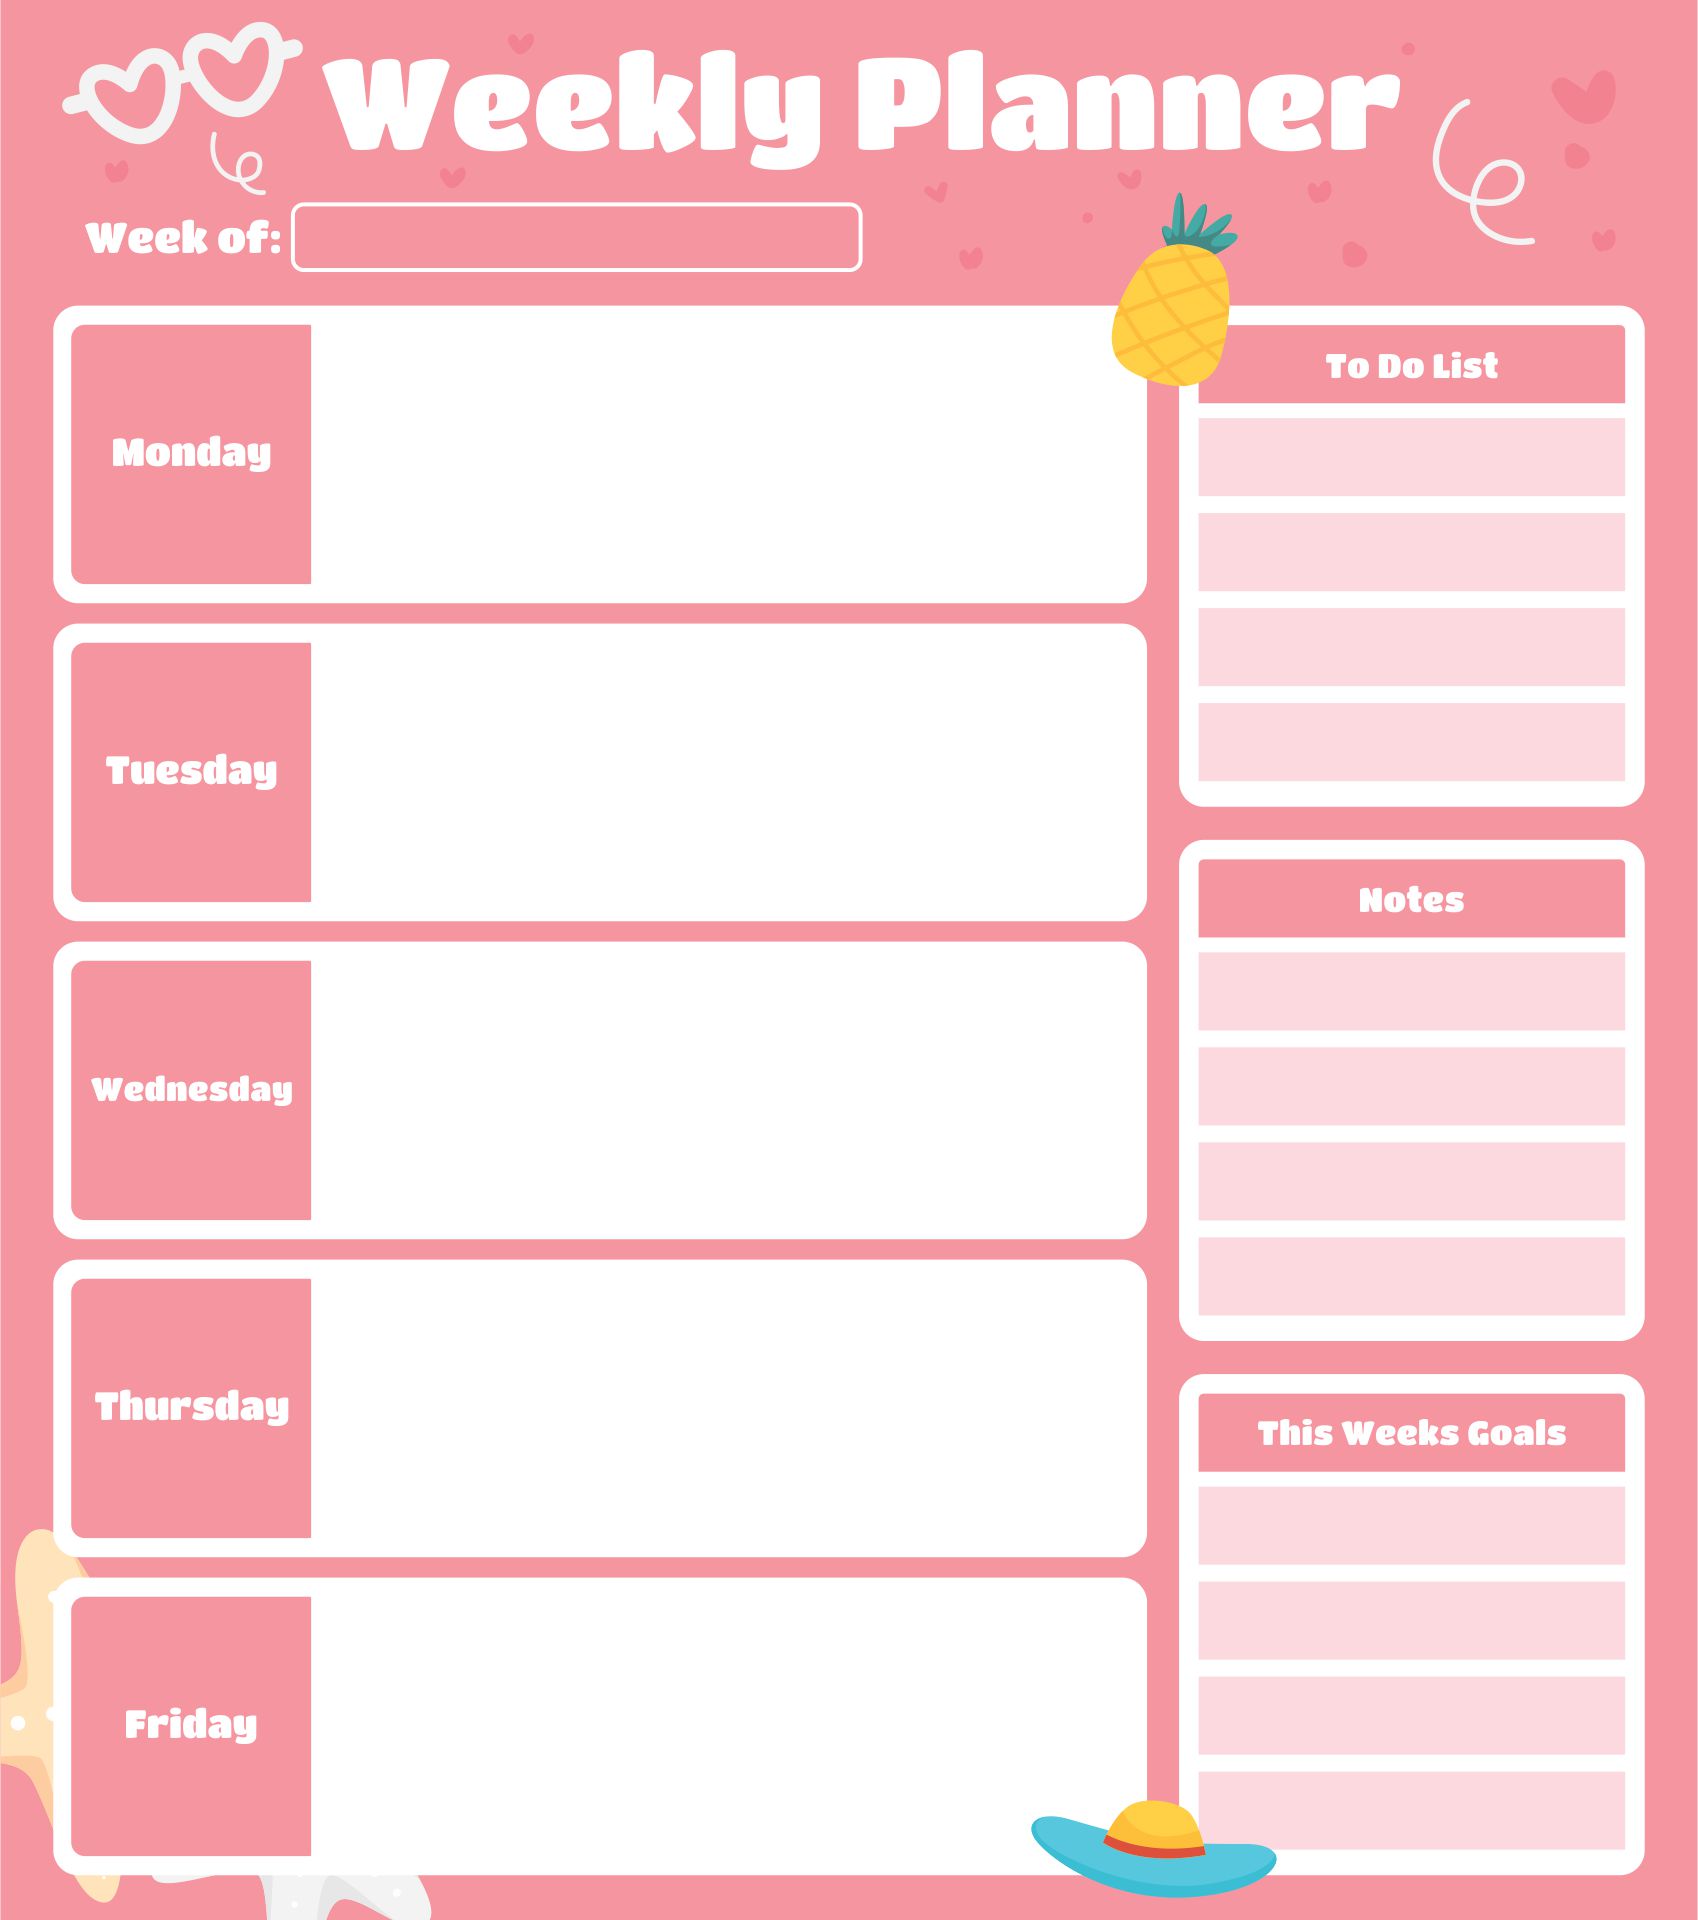 work planner monday to friday 4